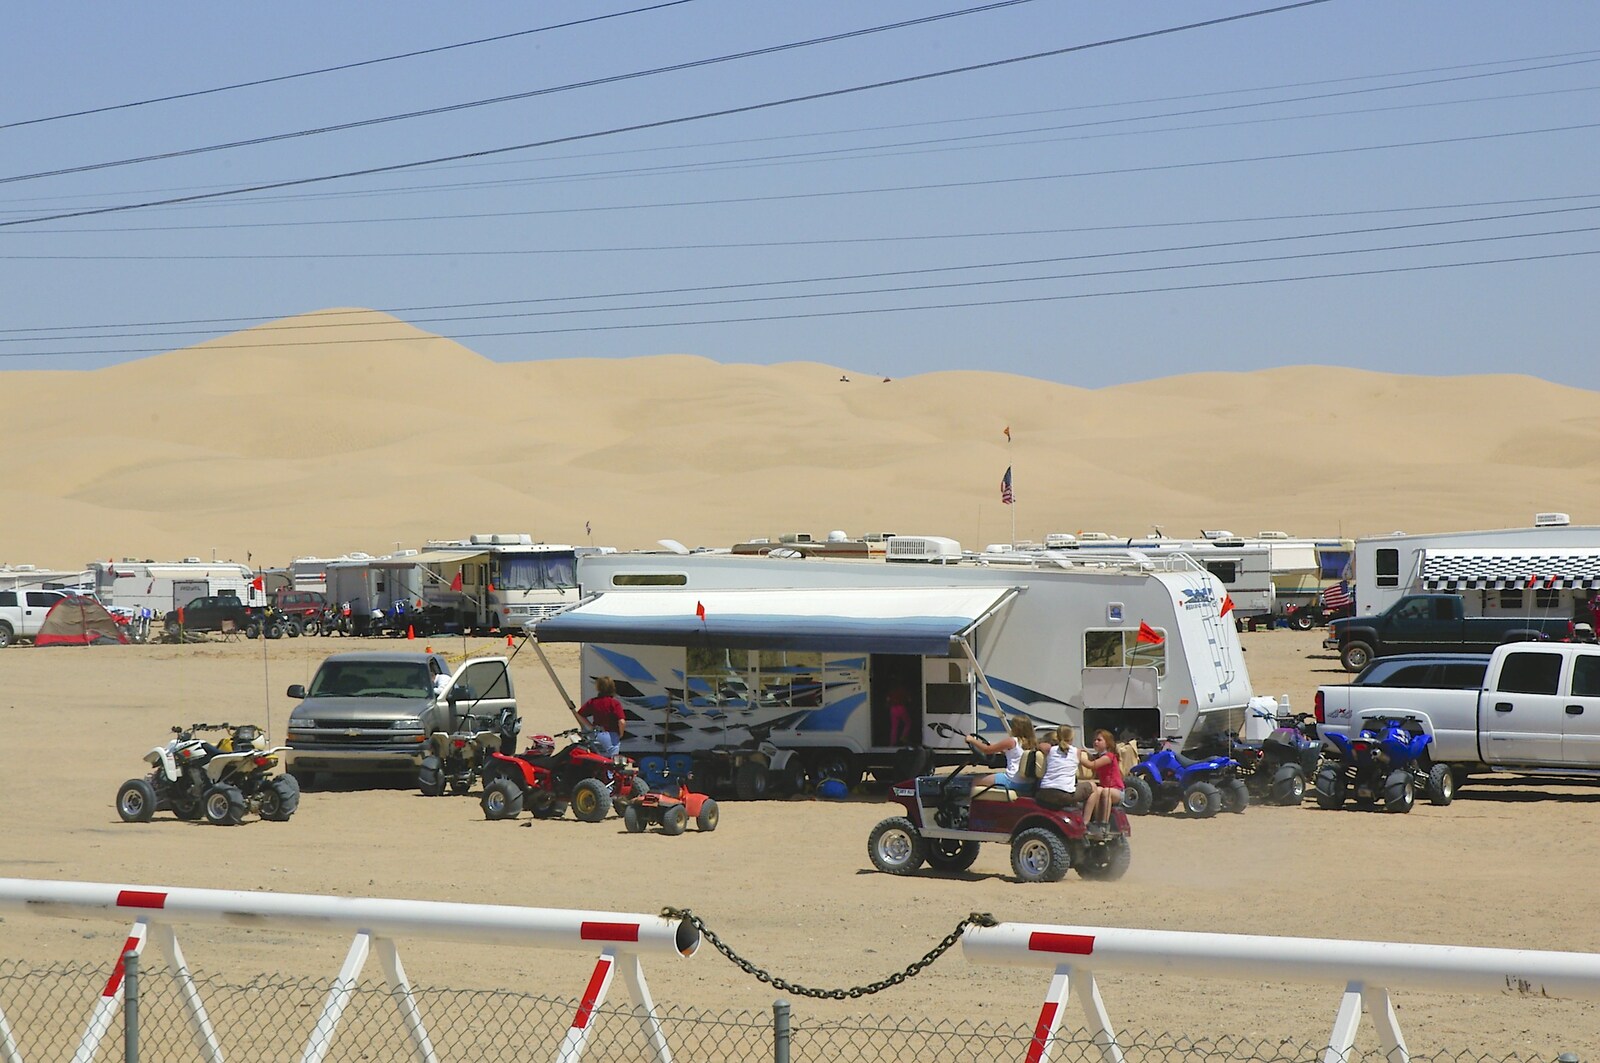 An RV park in the Dunes from San Diego Seven: The Desert and the Dunes, Arizona and California, US - 22nd April